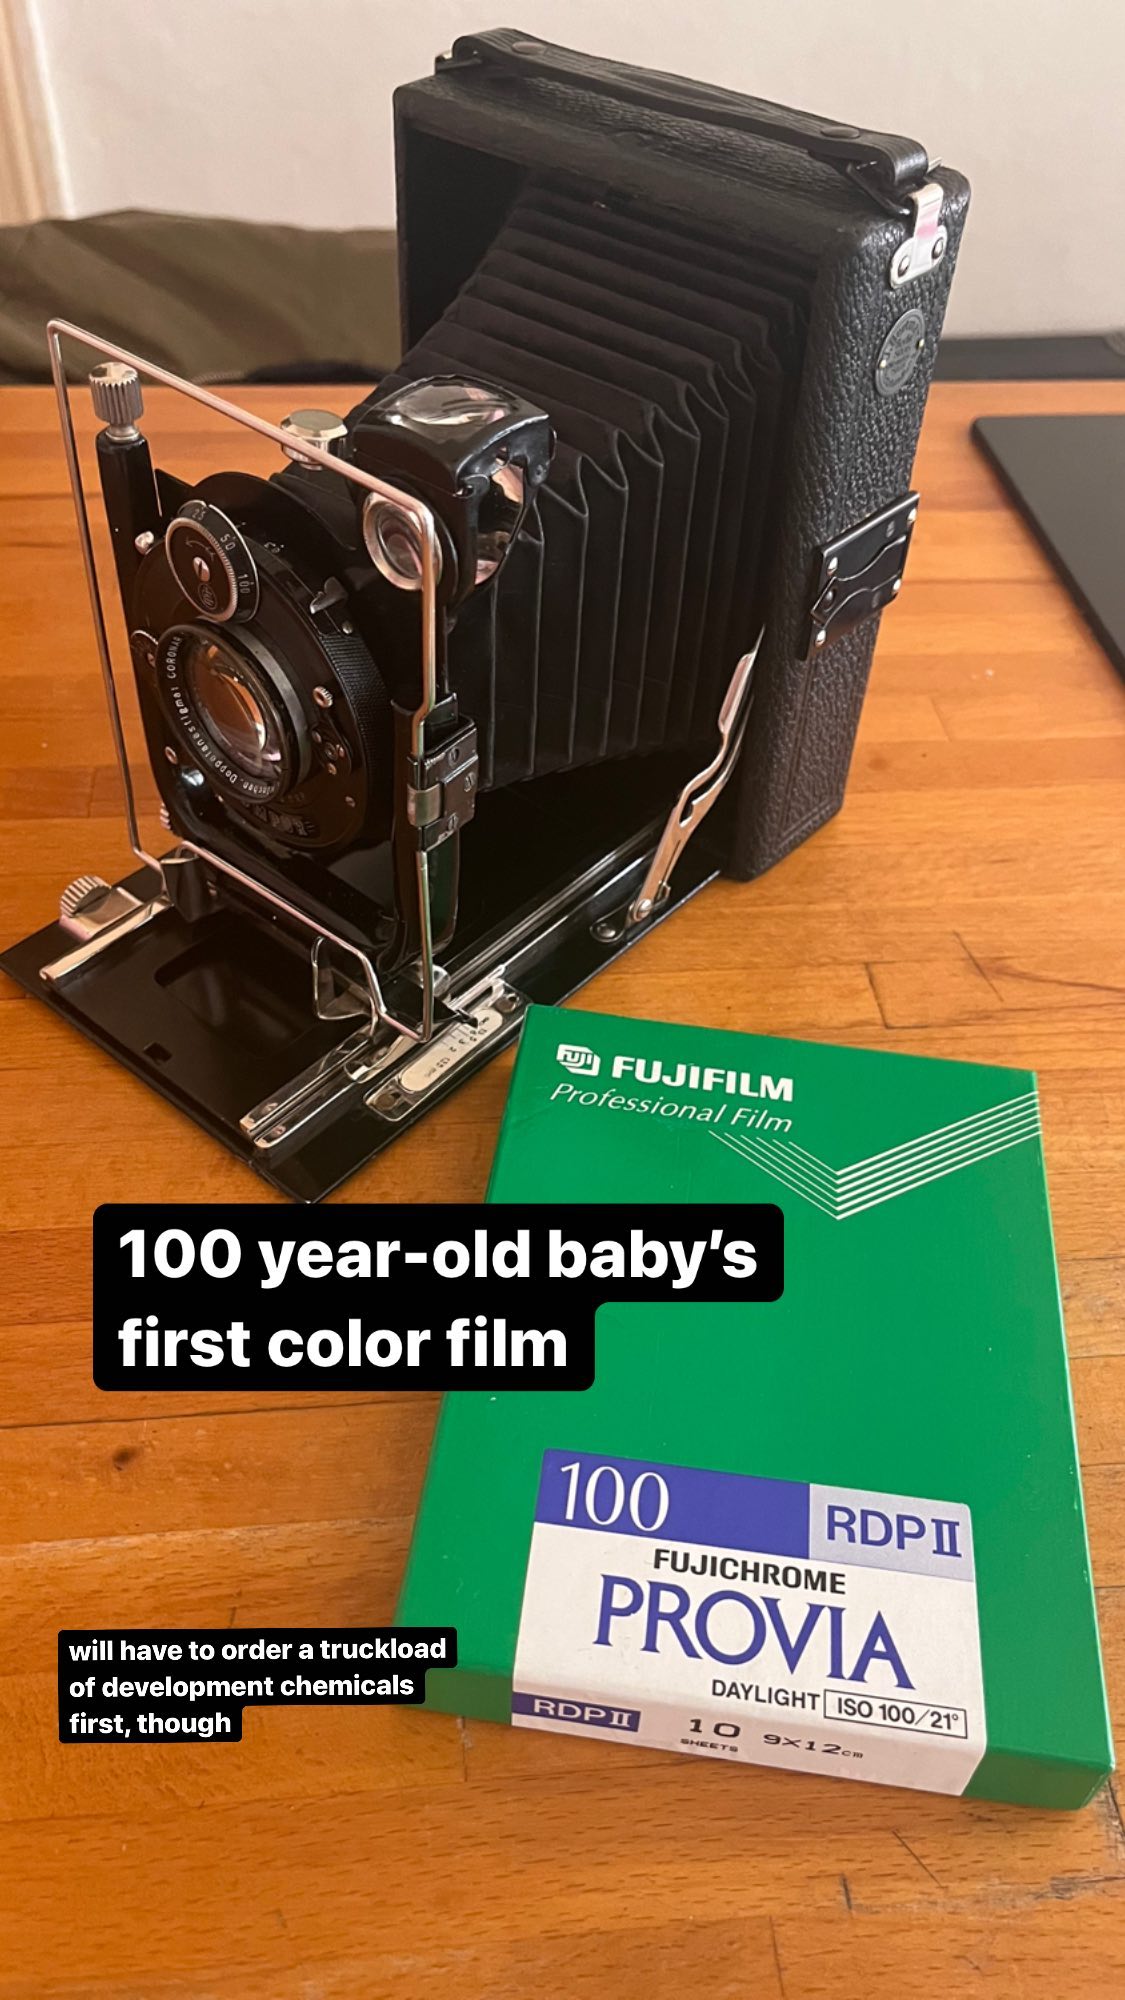 100 year-old baby’s first color film